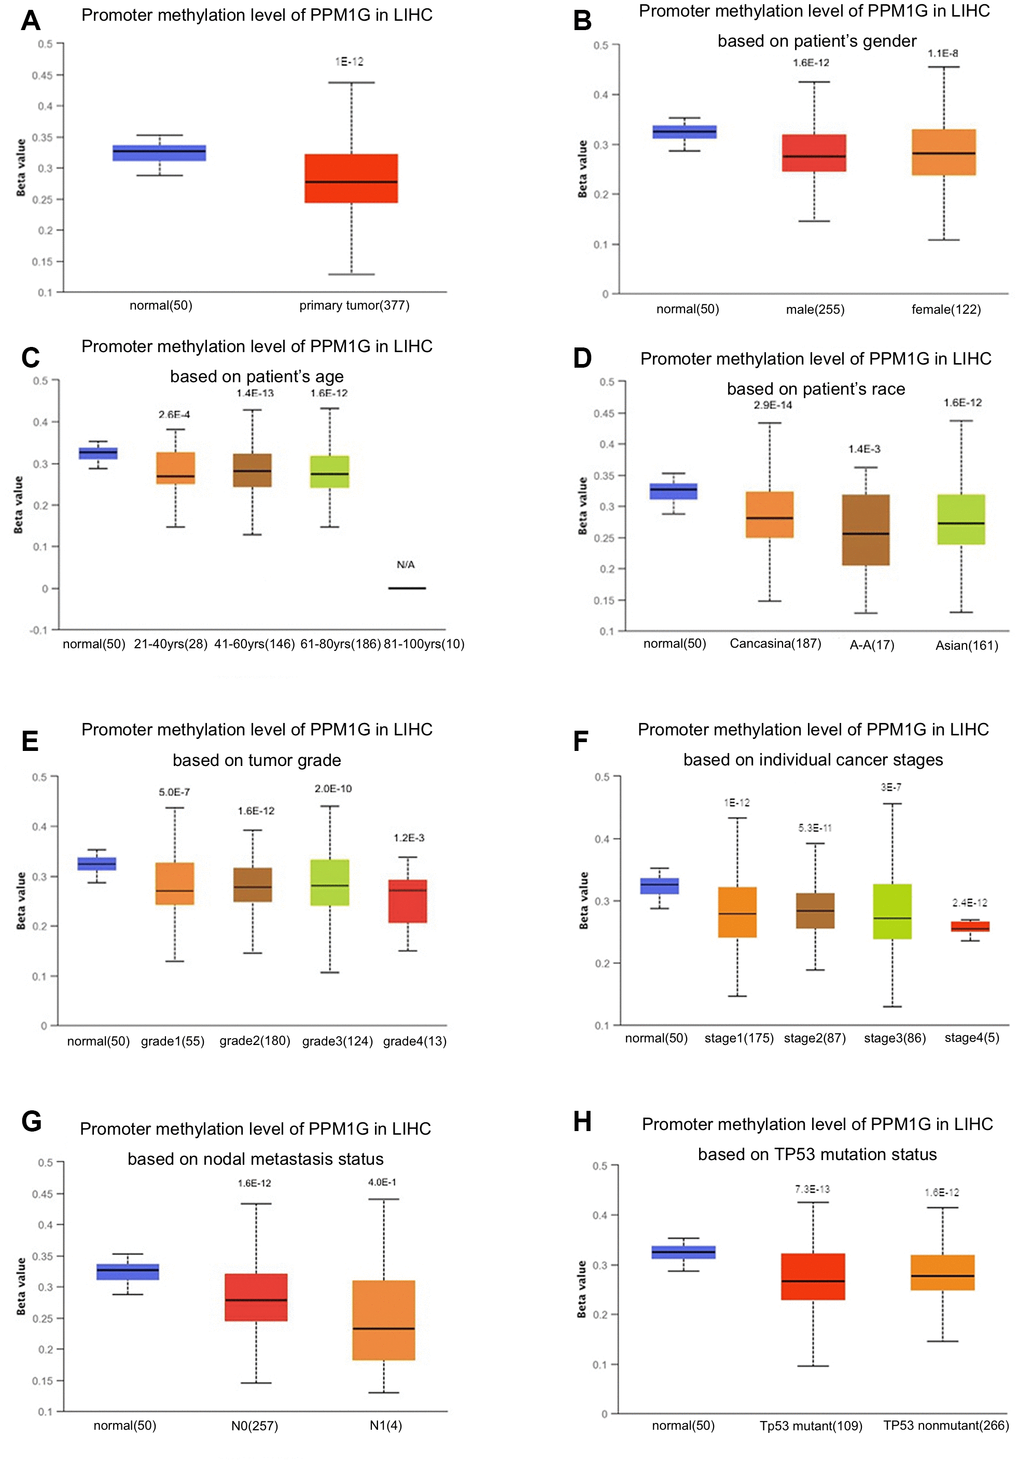 Relationship of PPM1G promoter methylation level with clinical characteristics in LIHC (UALCAN). Box-whisker plots showing the relationship between PPM1G promoter methylation in LIHC (different color plots) and normal (blue plots) tissues and patient characteristics: (A) normal vs. primary tumor, (B) patient sex, (C) patient age, (D) patient race, (E) tumor grade, (F) individual cancer stage, (G) nodal metastasis status, and (H) TP53 mutation status. The beta value indicates the level of DNA methylation (ranging from 0 (unmethylated) to 1 (fully methylated)).